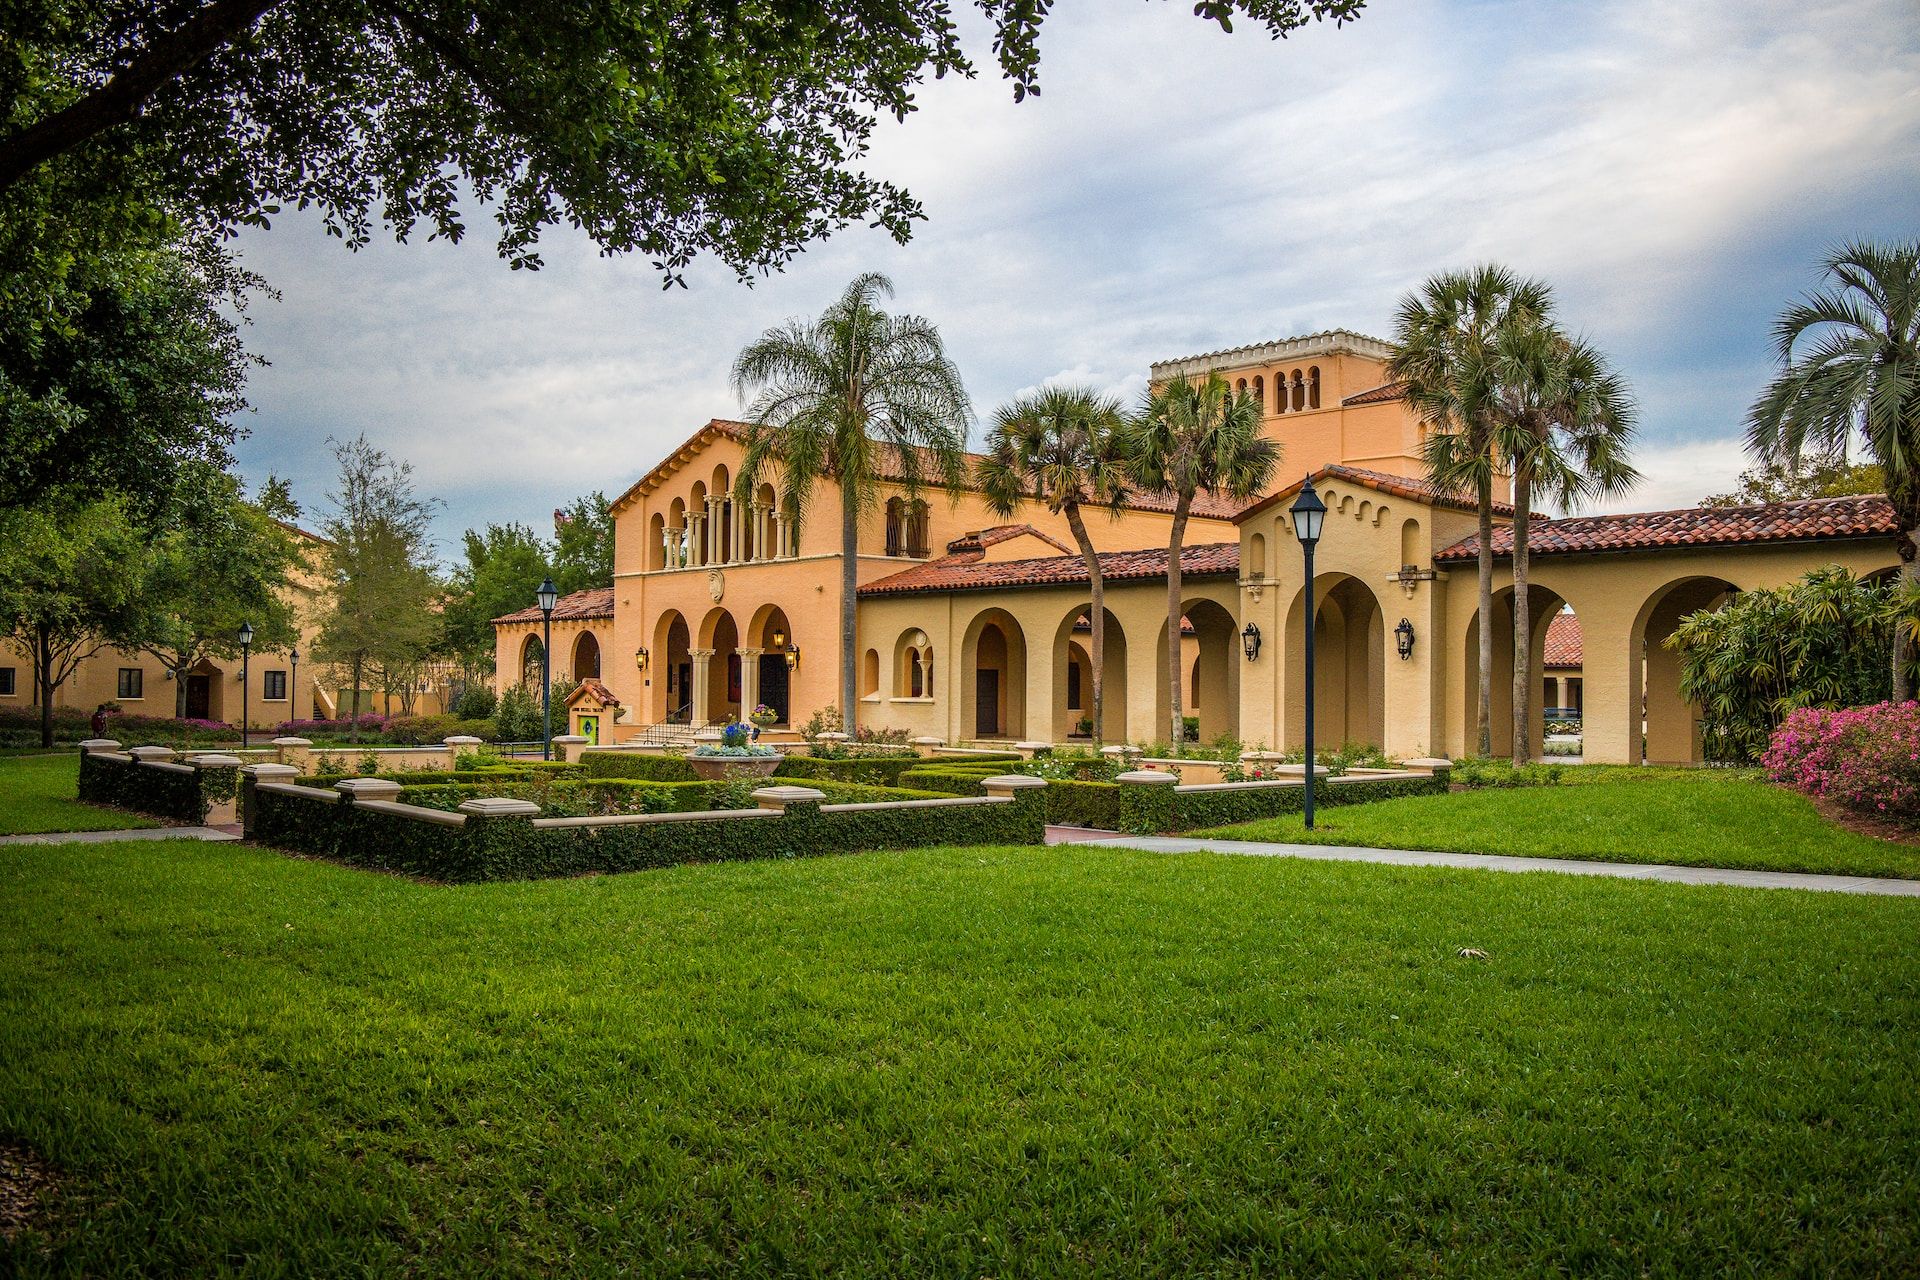 Rollins College overlooking a lush green lawn